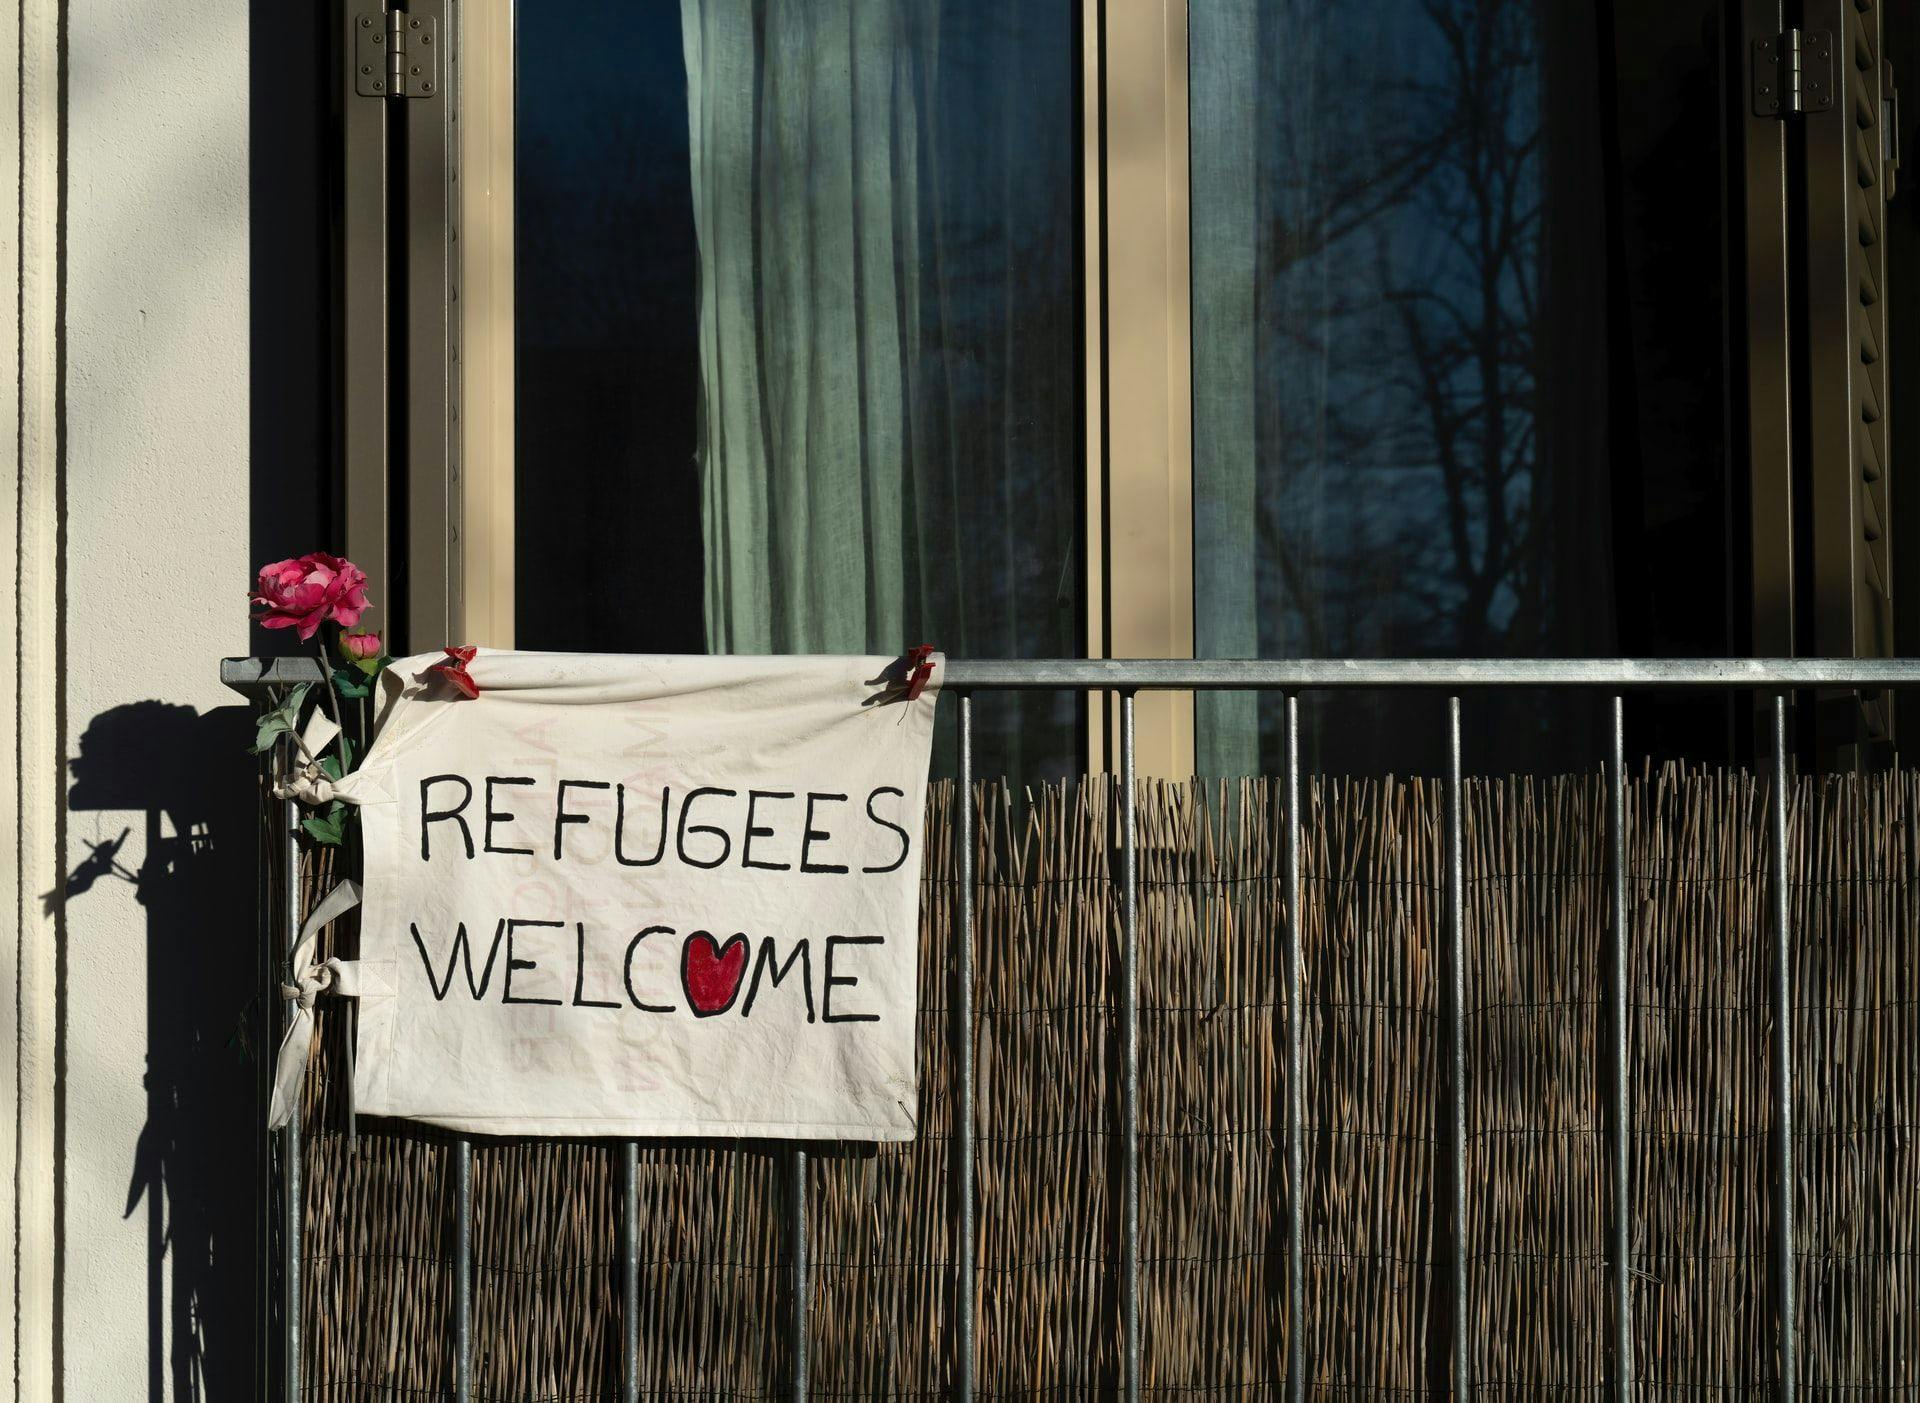 Luxembourg accepts 98% of refugees. What problems do the remaining 2% face?